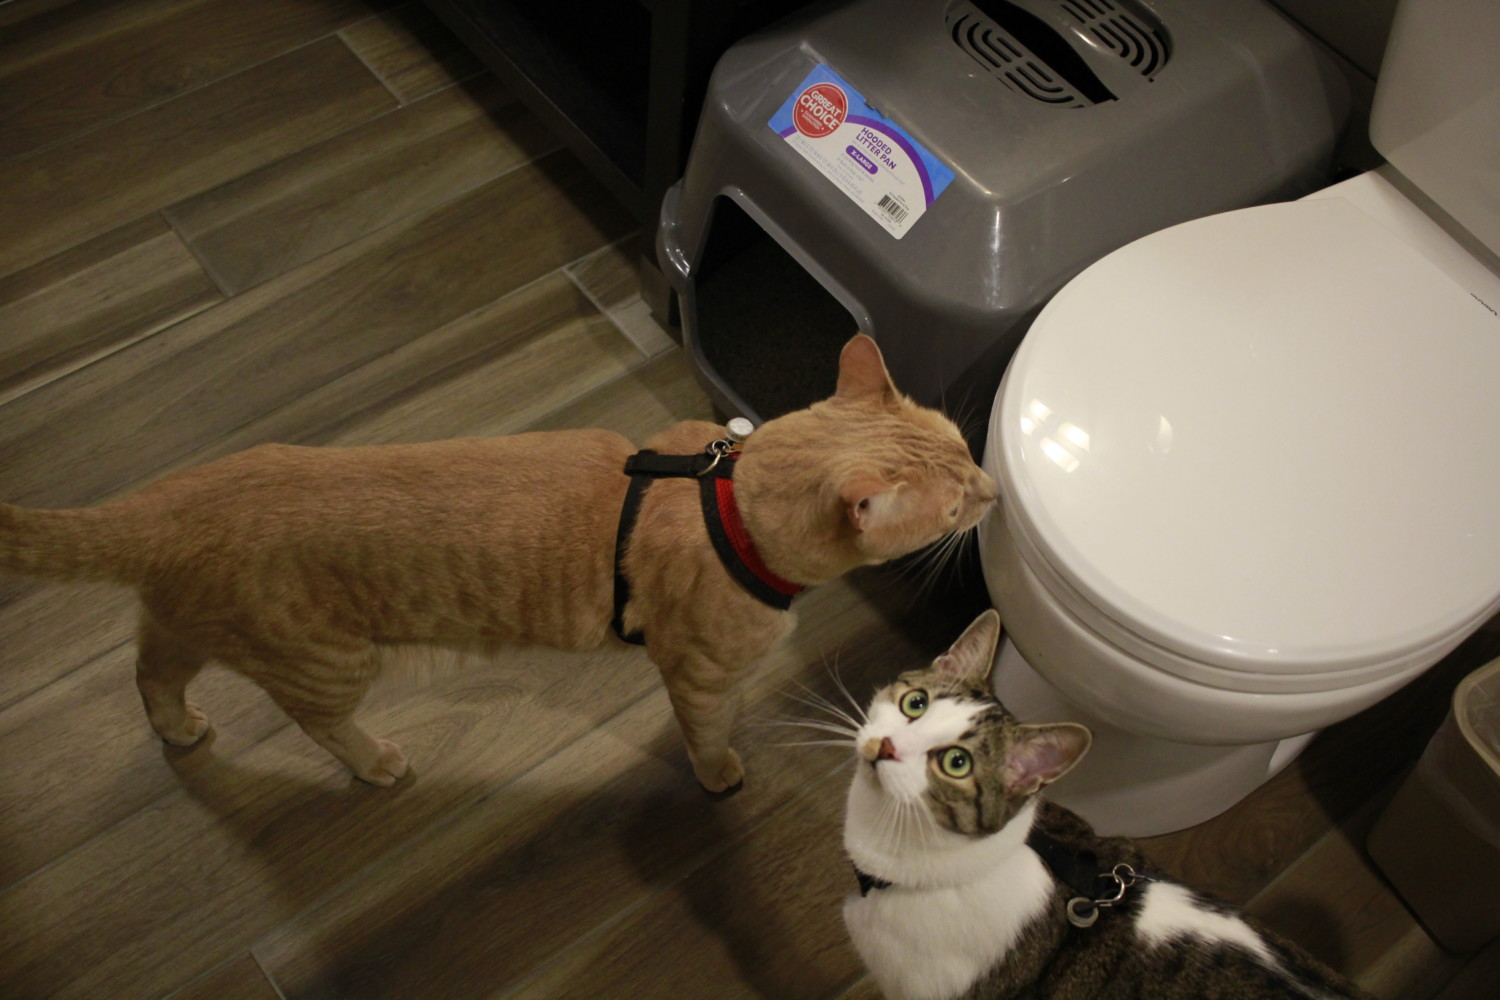 Fish and Chips the cats standing by their litter box in a hotel bathroom